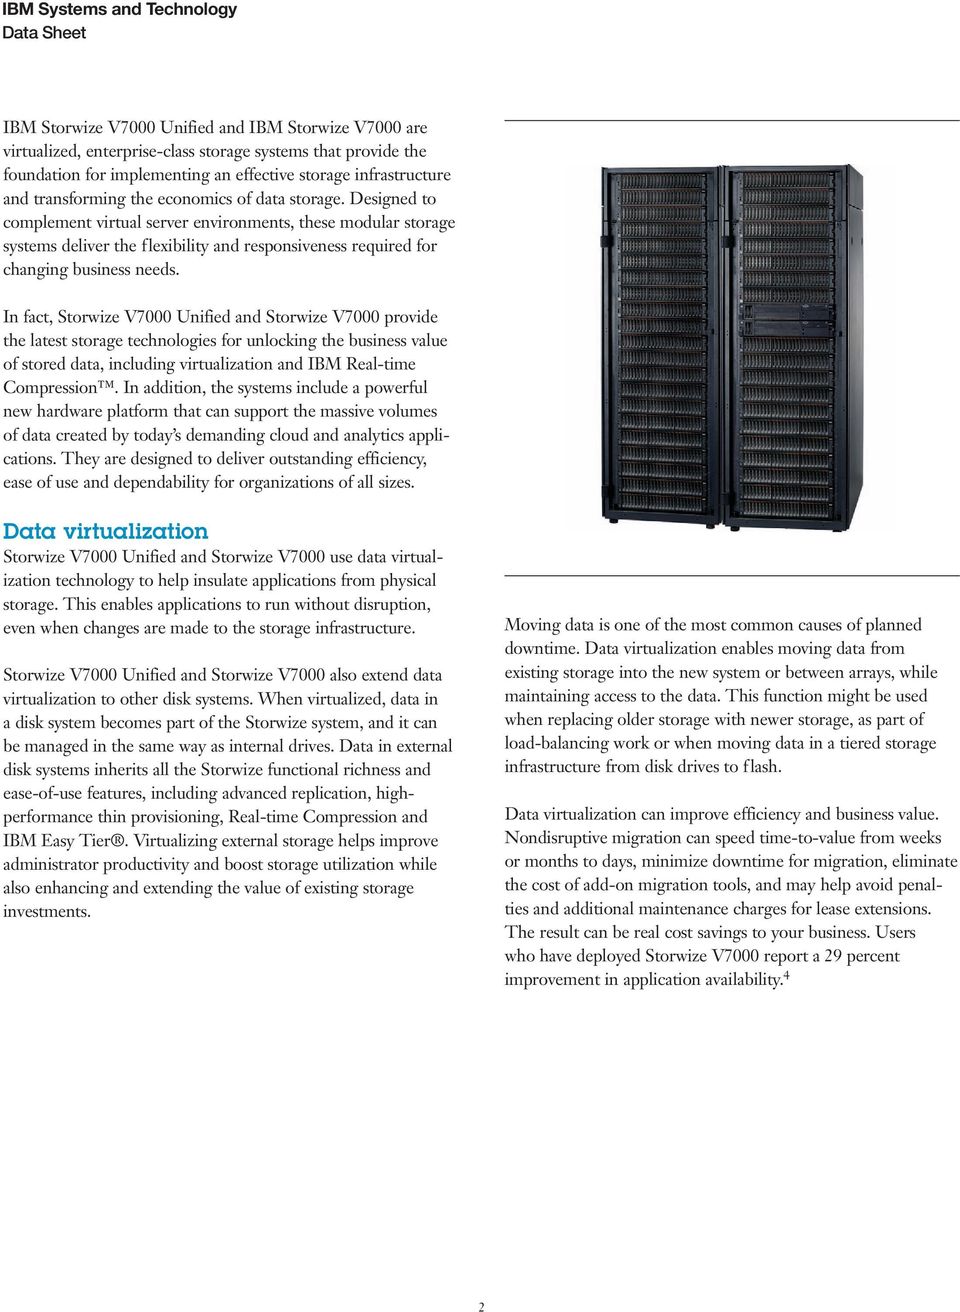 In fact, Storwize V7000 Unified and Storwize V7000 provide the latest storage technologies for unlocking the business value of stored data, including virtualization and IBM Real-time Compression.